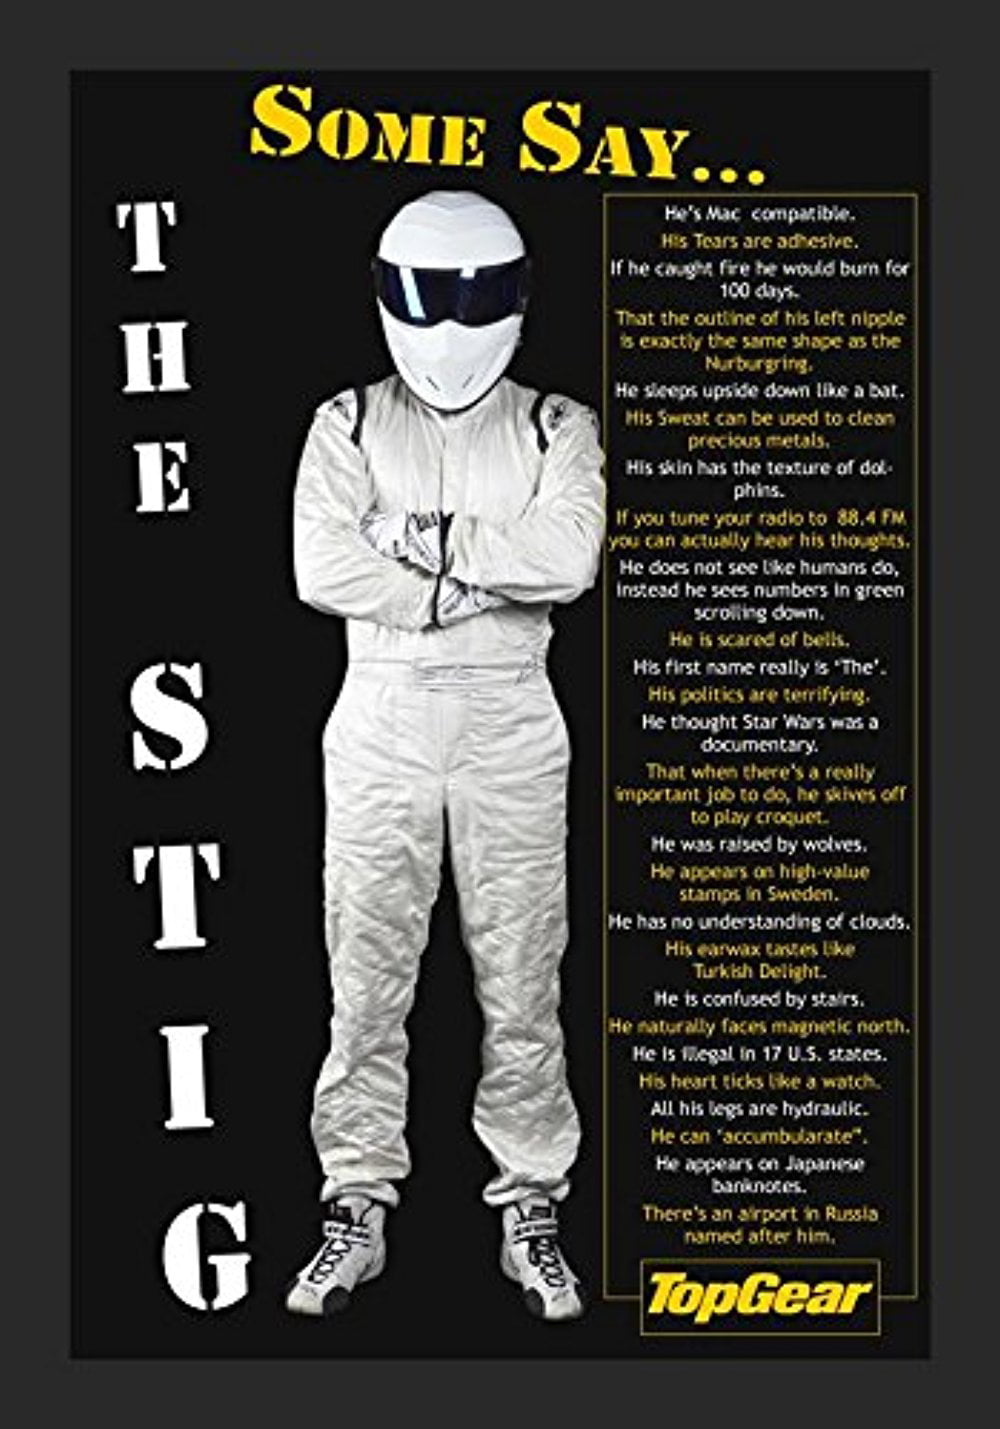 FRAMED Top Gear - Some Say... The Stig 18x12 Art Print Poster Television Walmart.com